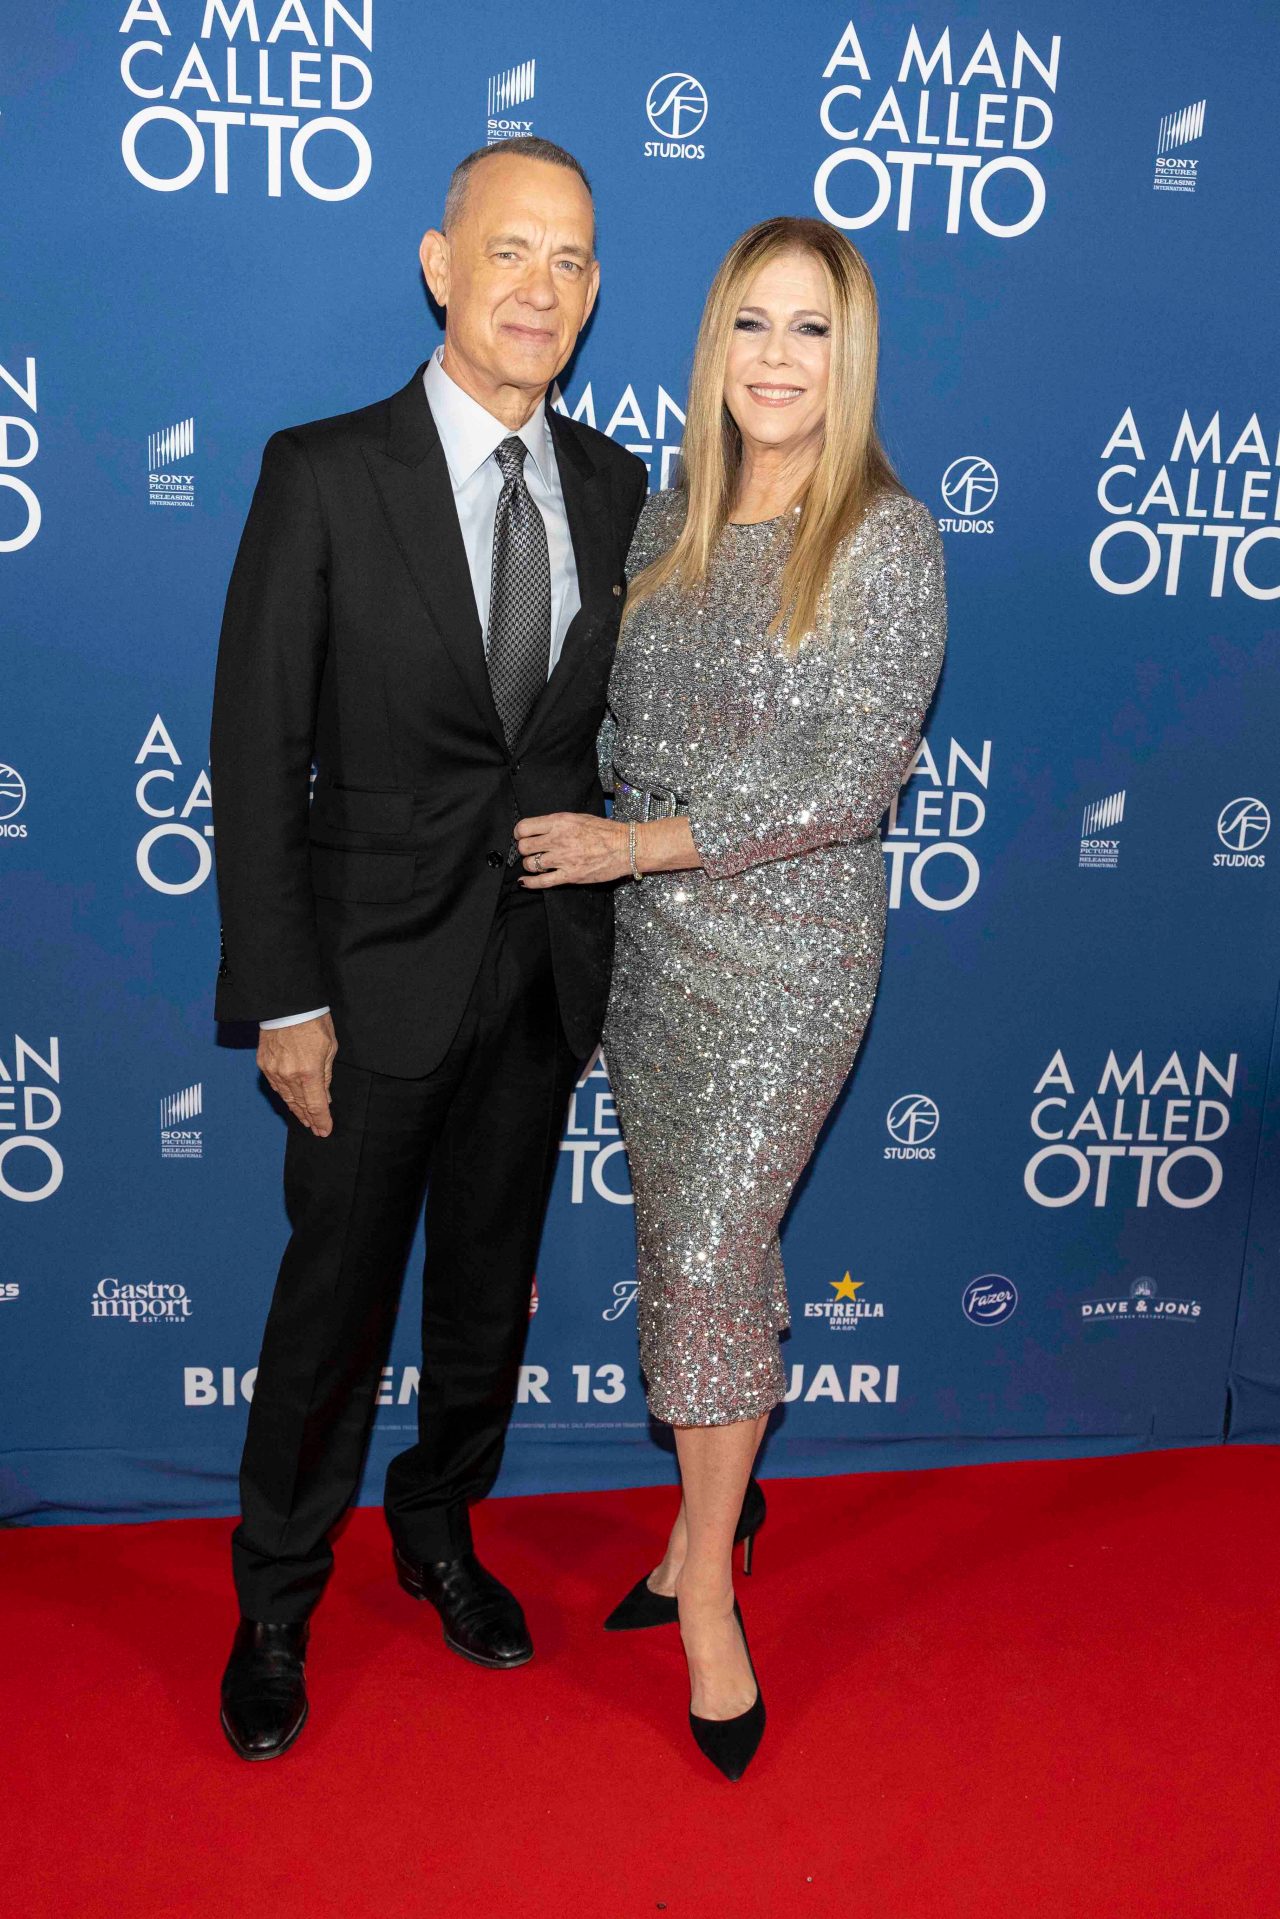 STOCKHOLM, SWEDEN - DECEMBER 13: Tom Hanks and Rita Wilson attend the premiere of "A Man Called Otto" with wife Rita Wilson at Filmstaden Rigoletto on December 13, 2022 in Stockholm, Sweden. (Photo by Michael Campanella/Getty Images)